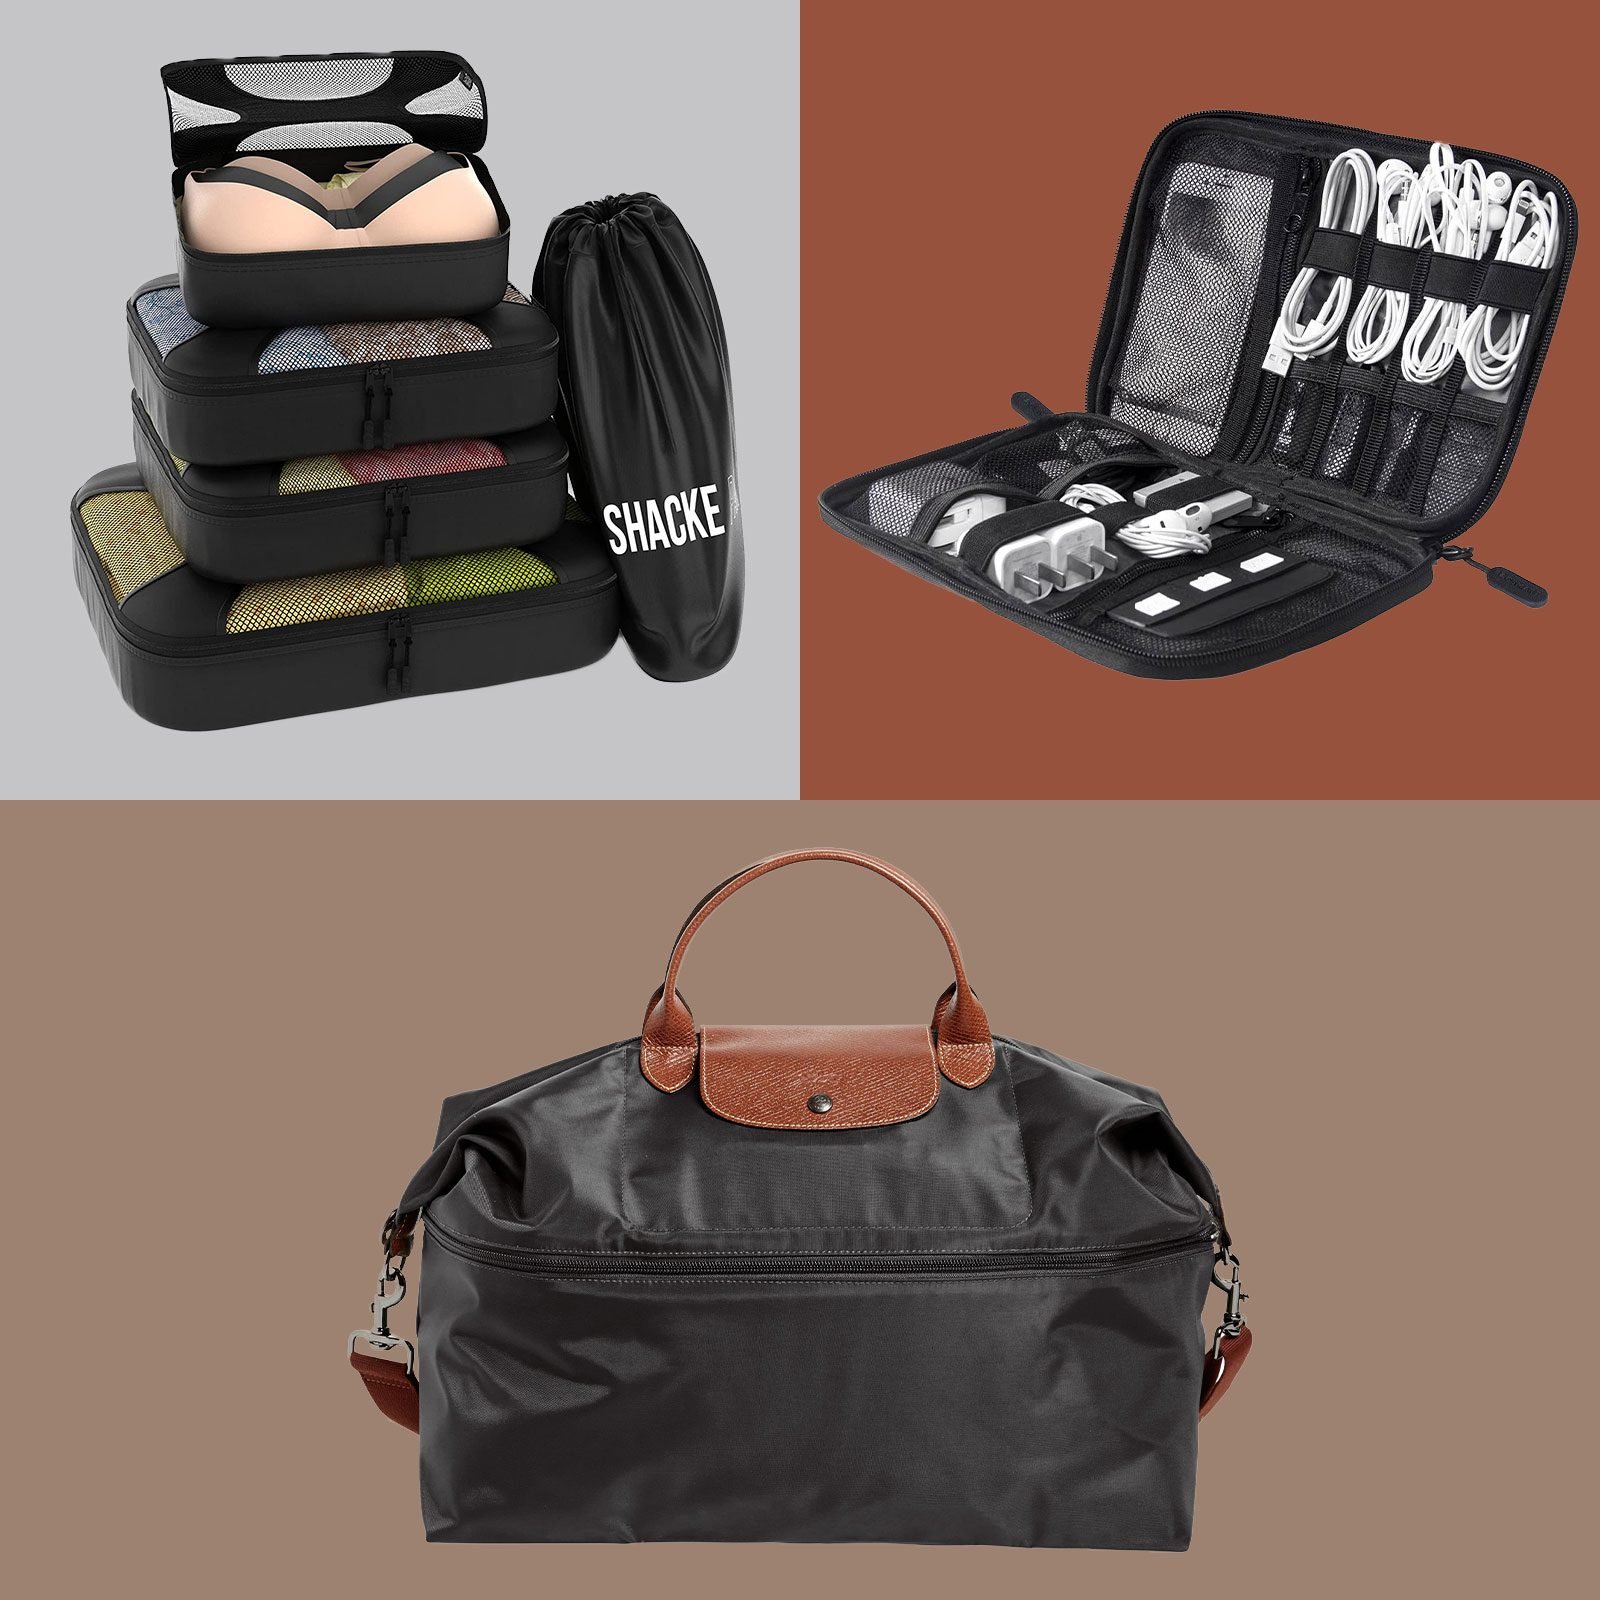 Best Travel Accessories for Women in 2023